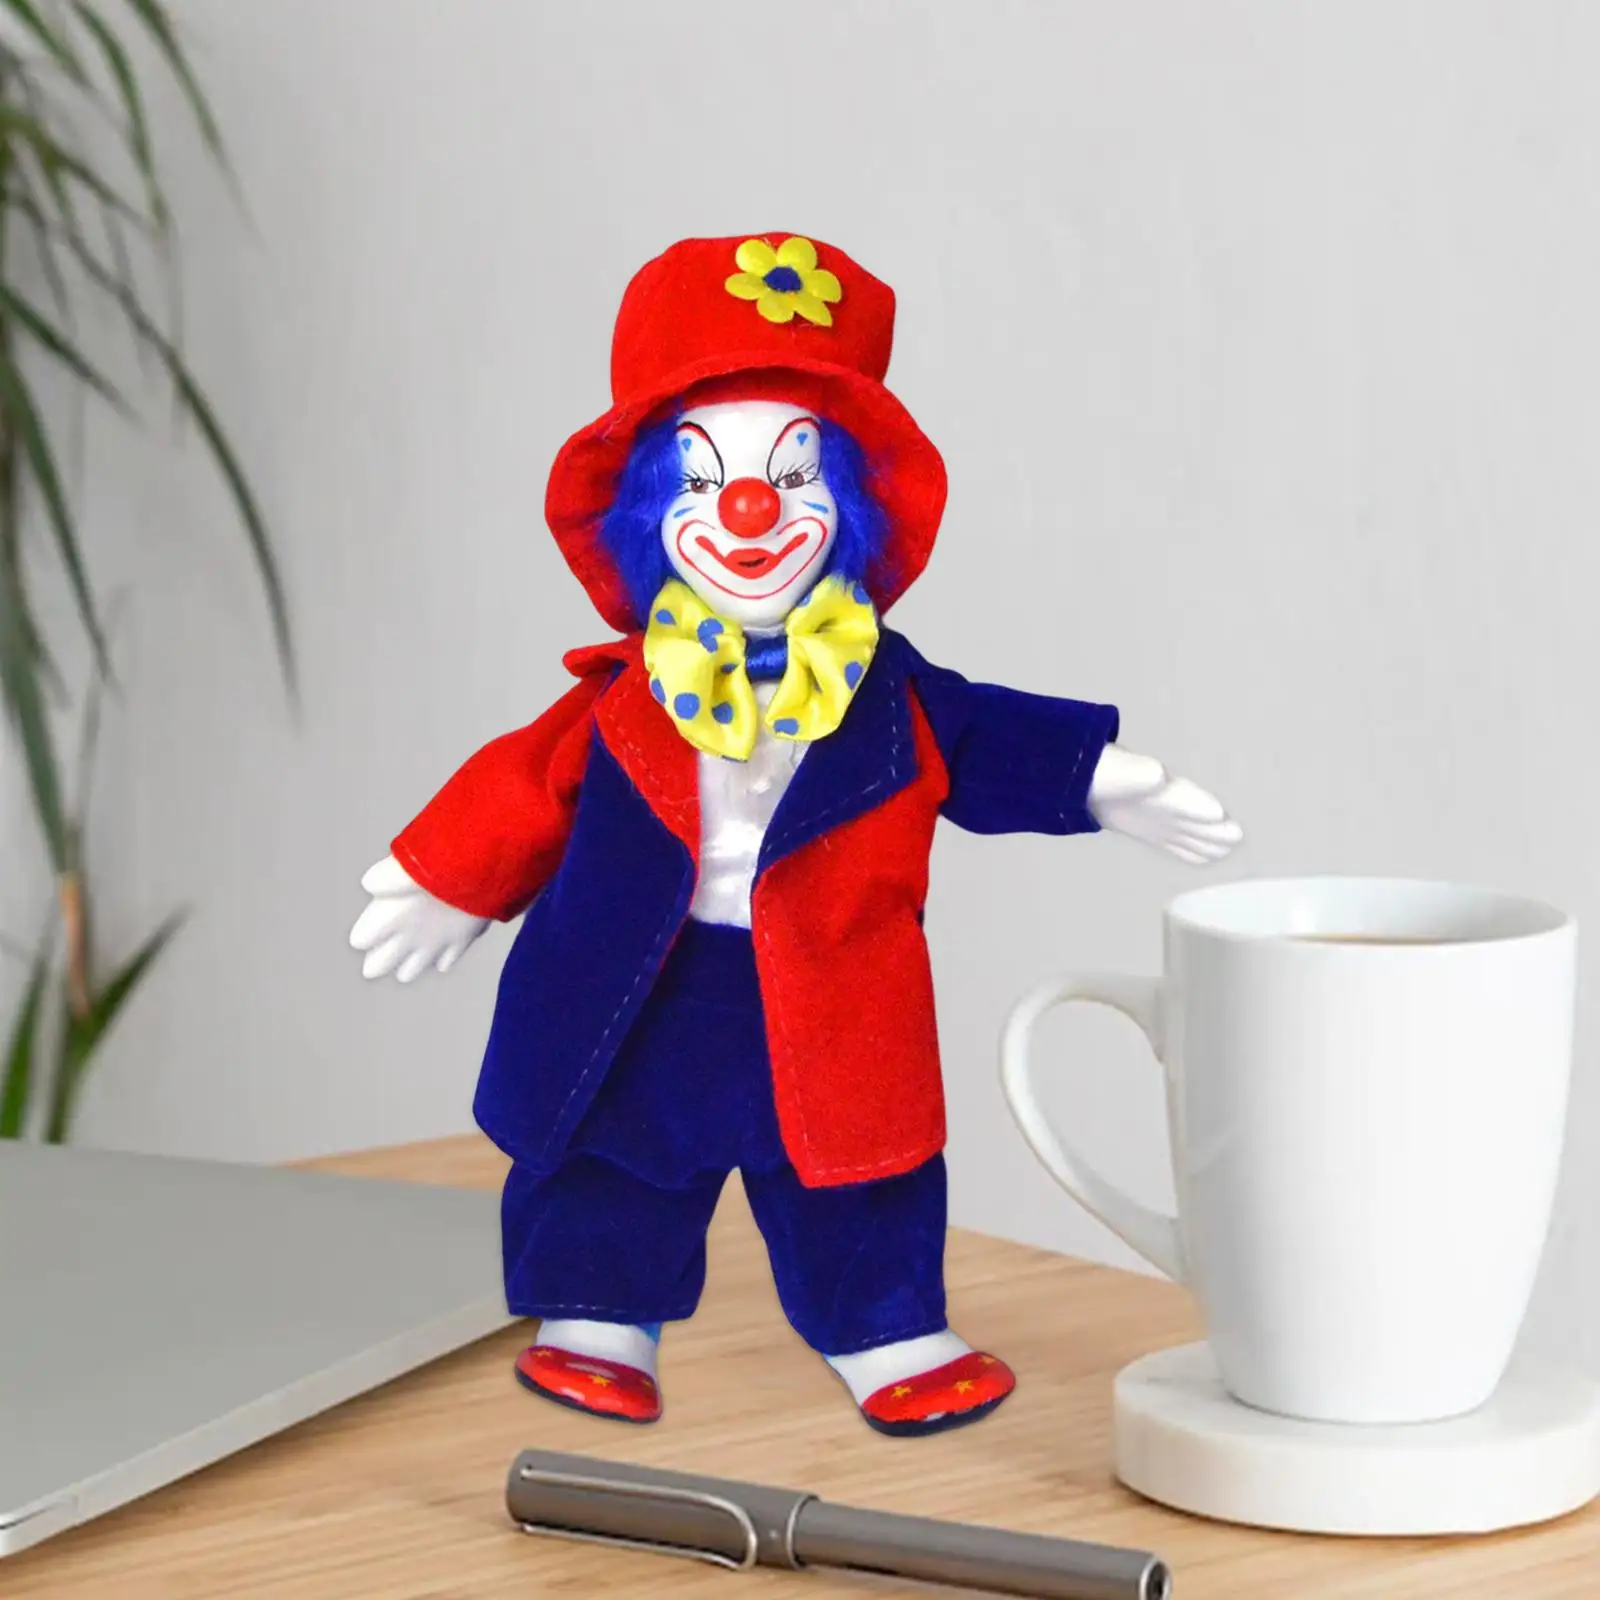 18cm Clown Doll Dolls Model Toy Collectible Arts Crafts for Birthdays Gift